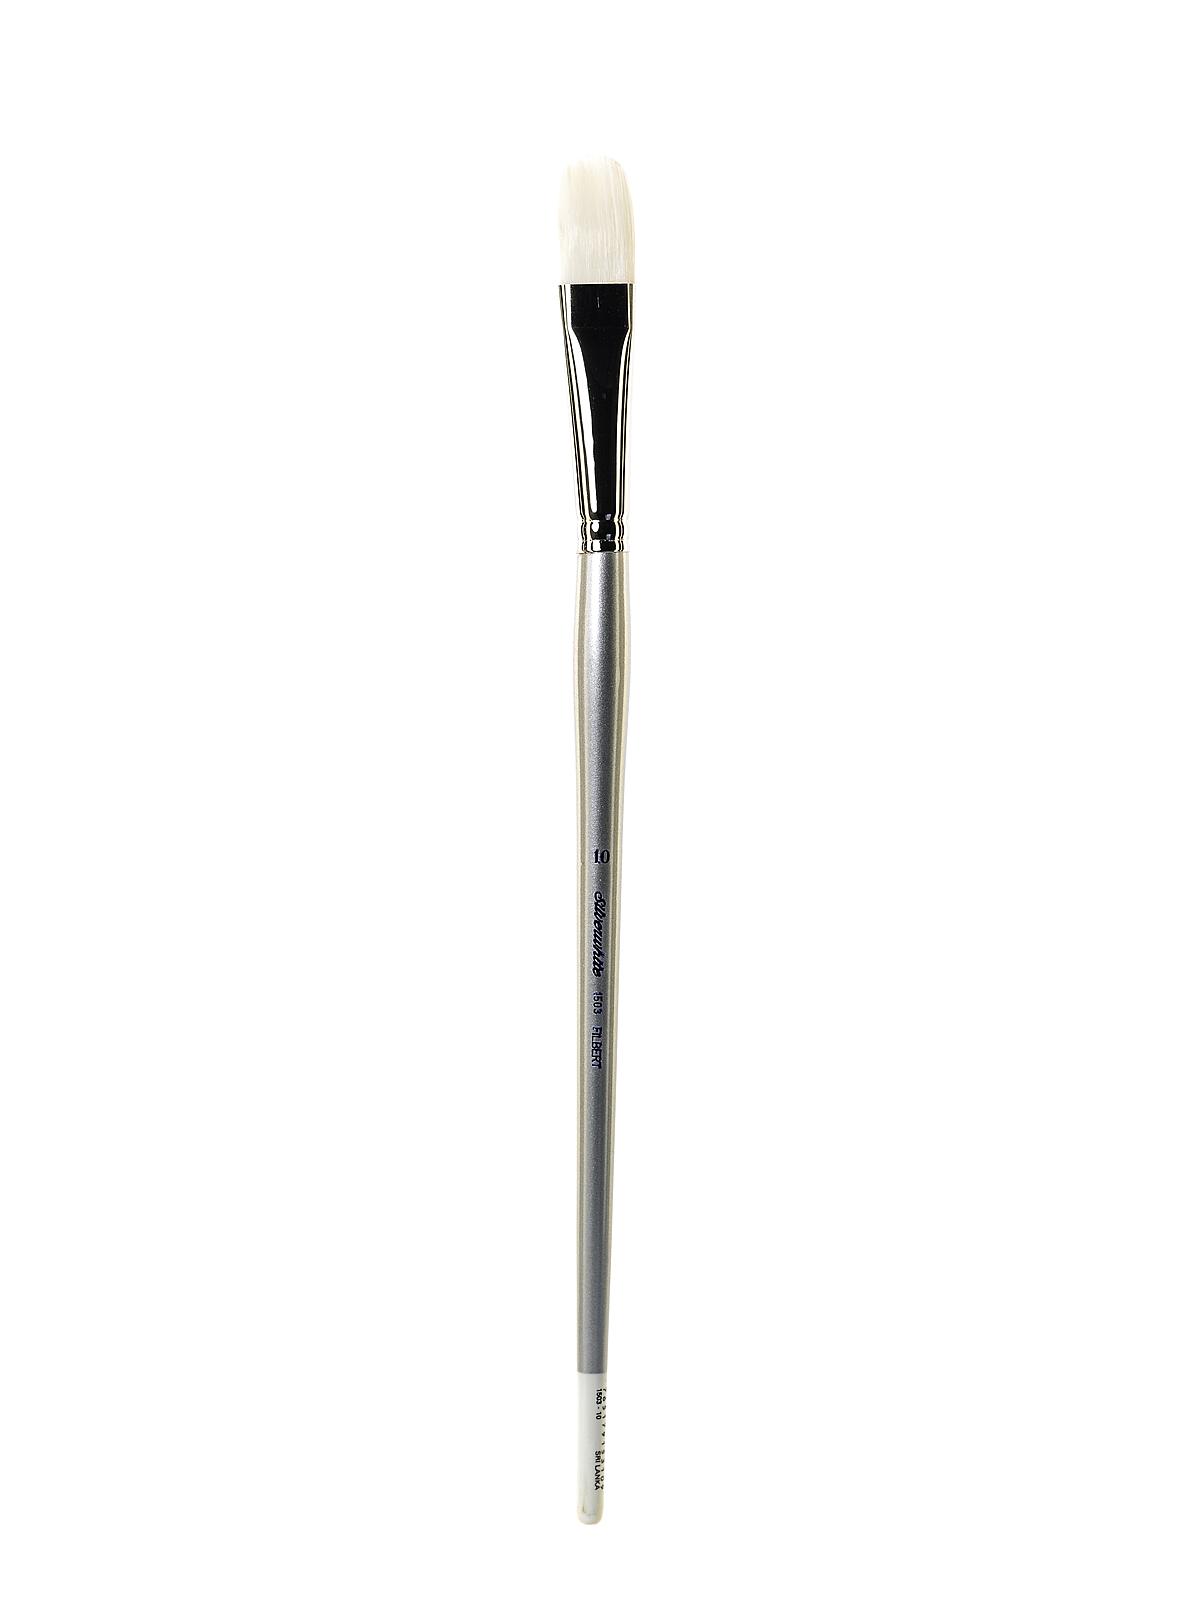 Silver Brush Silverwhite Series Synthetic Brushes Long Handle